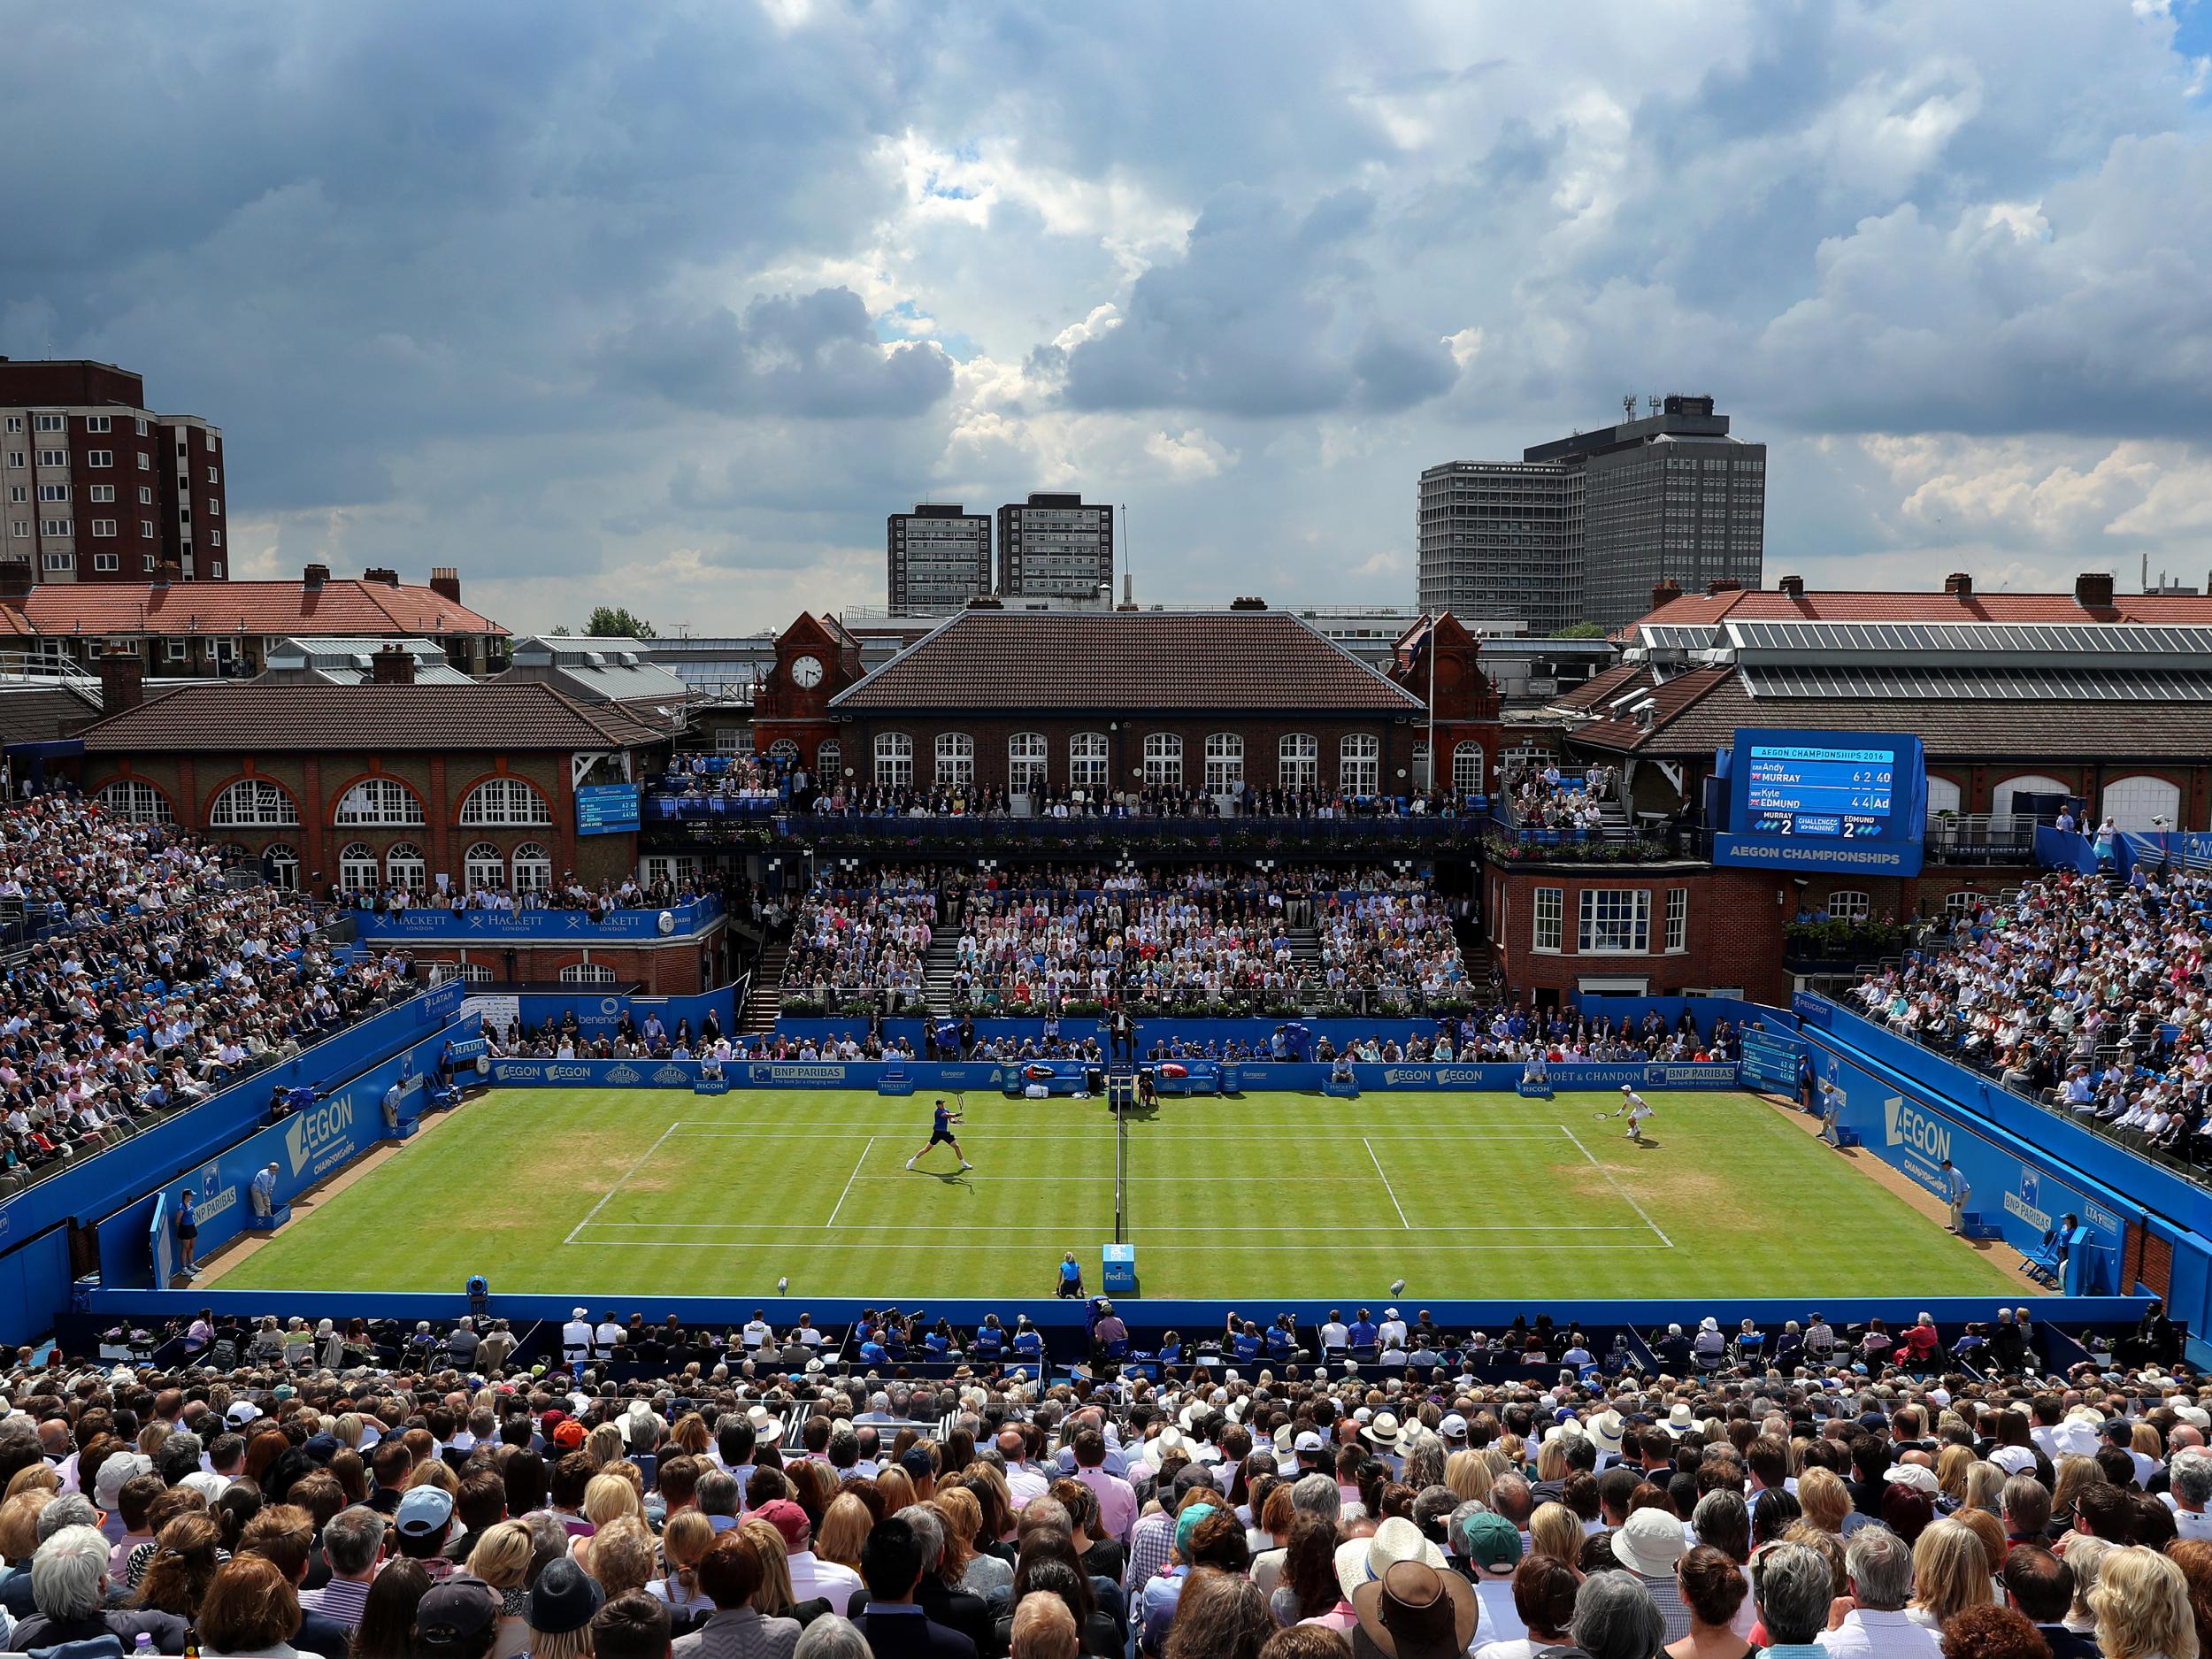 Andy Roddick famously called the courts at Queen's "arguably the best in the world"